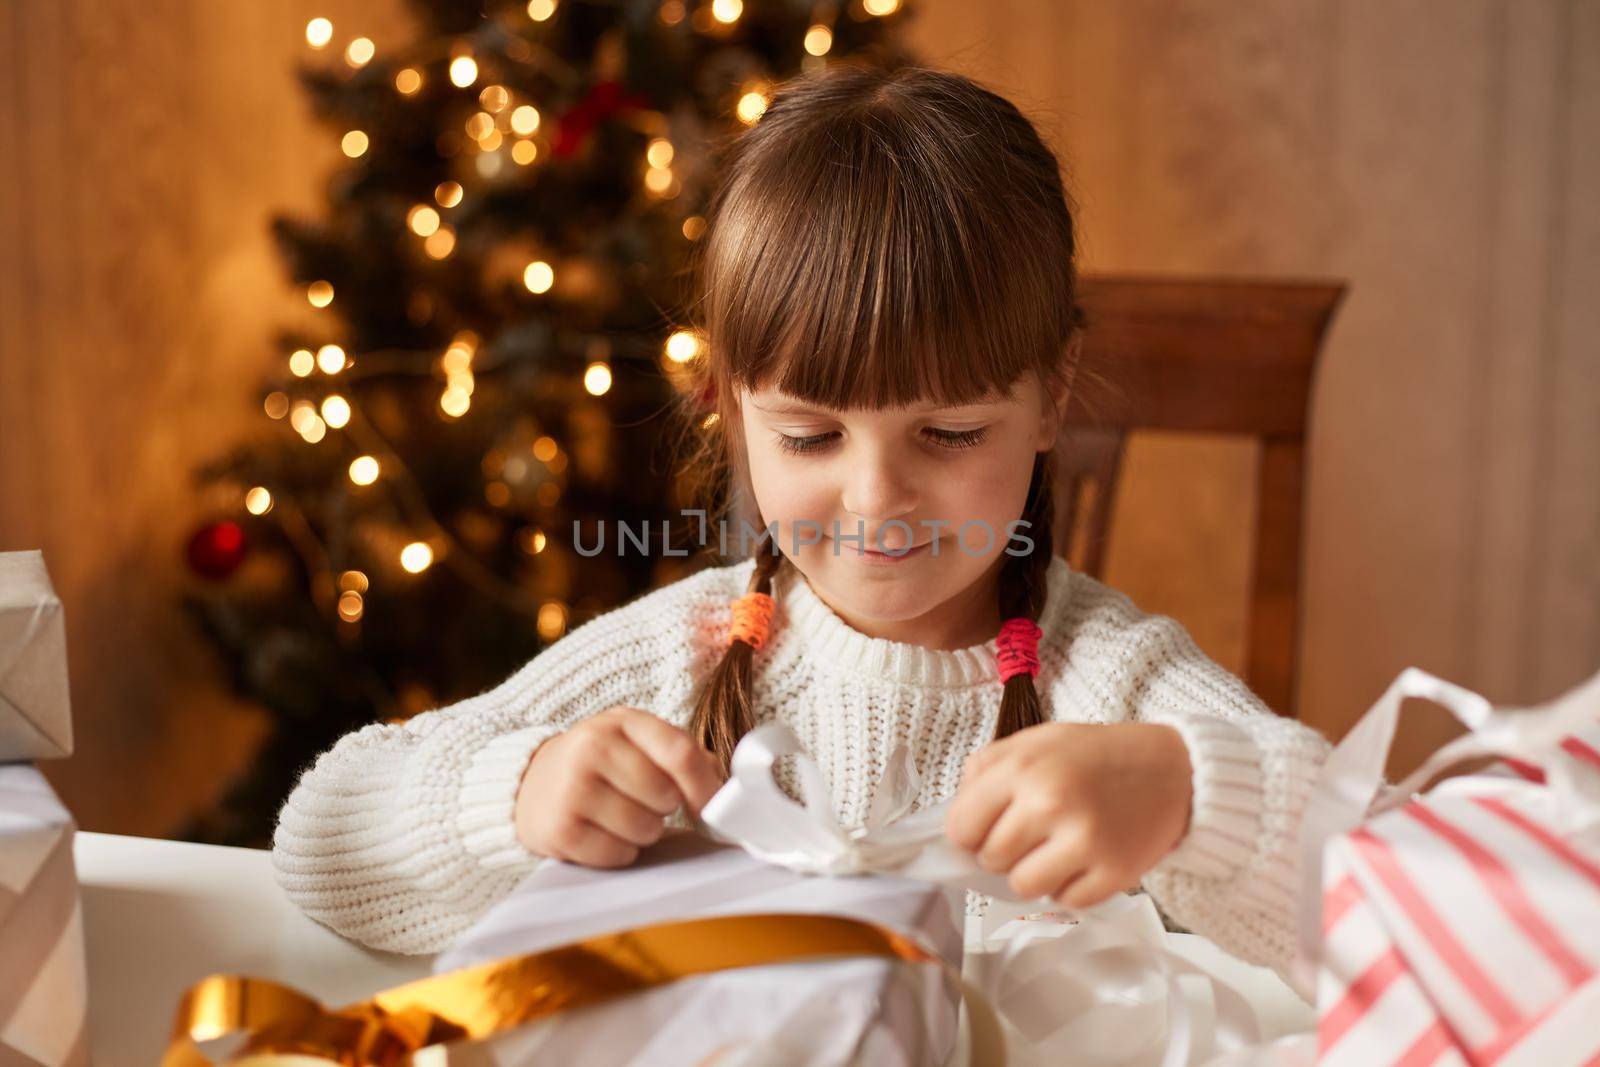 Indoor shot of cute charming little girl wearing white sweater packing presents for her parents and friends, smiling happily while sitting at table in living room with decorated fir tree on background